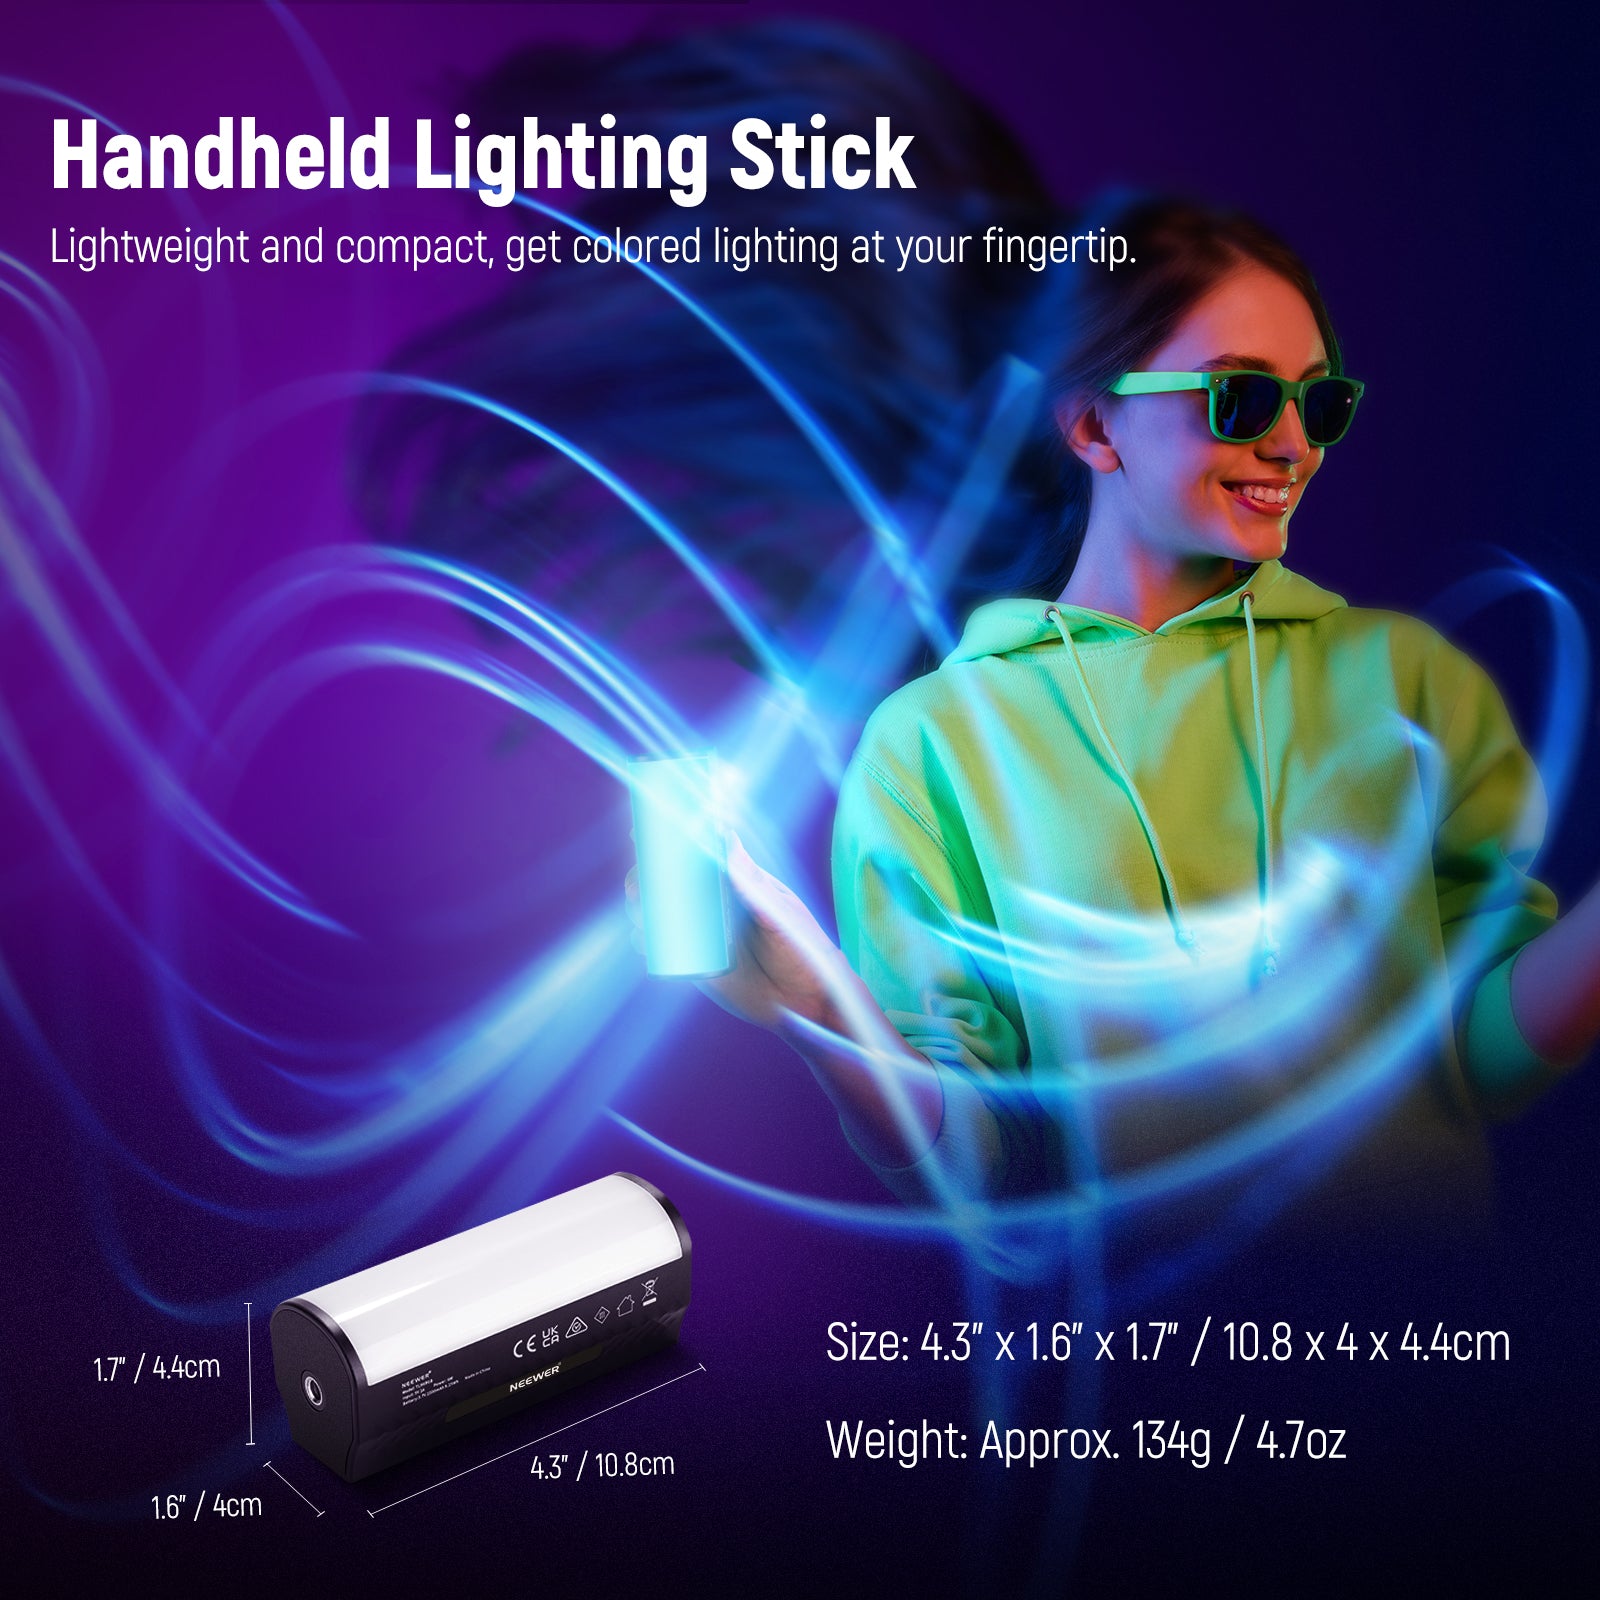 Take Control of Your Video Lighting with the Neewer TL96RGB LED Stick